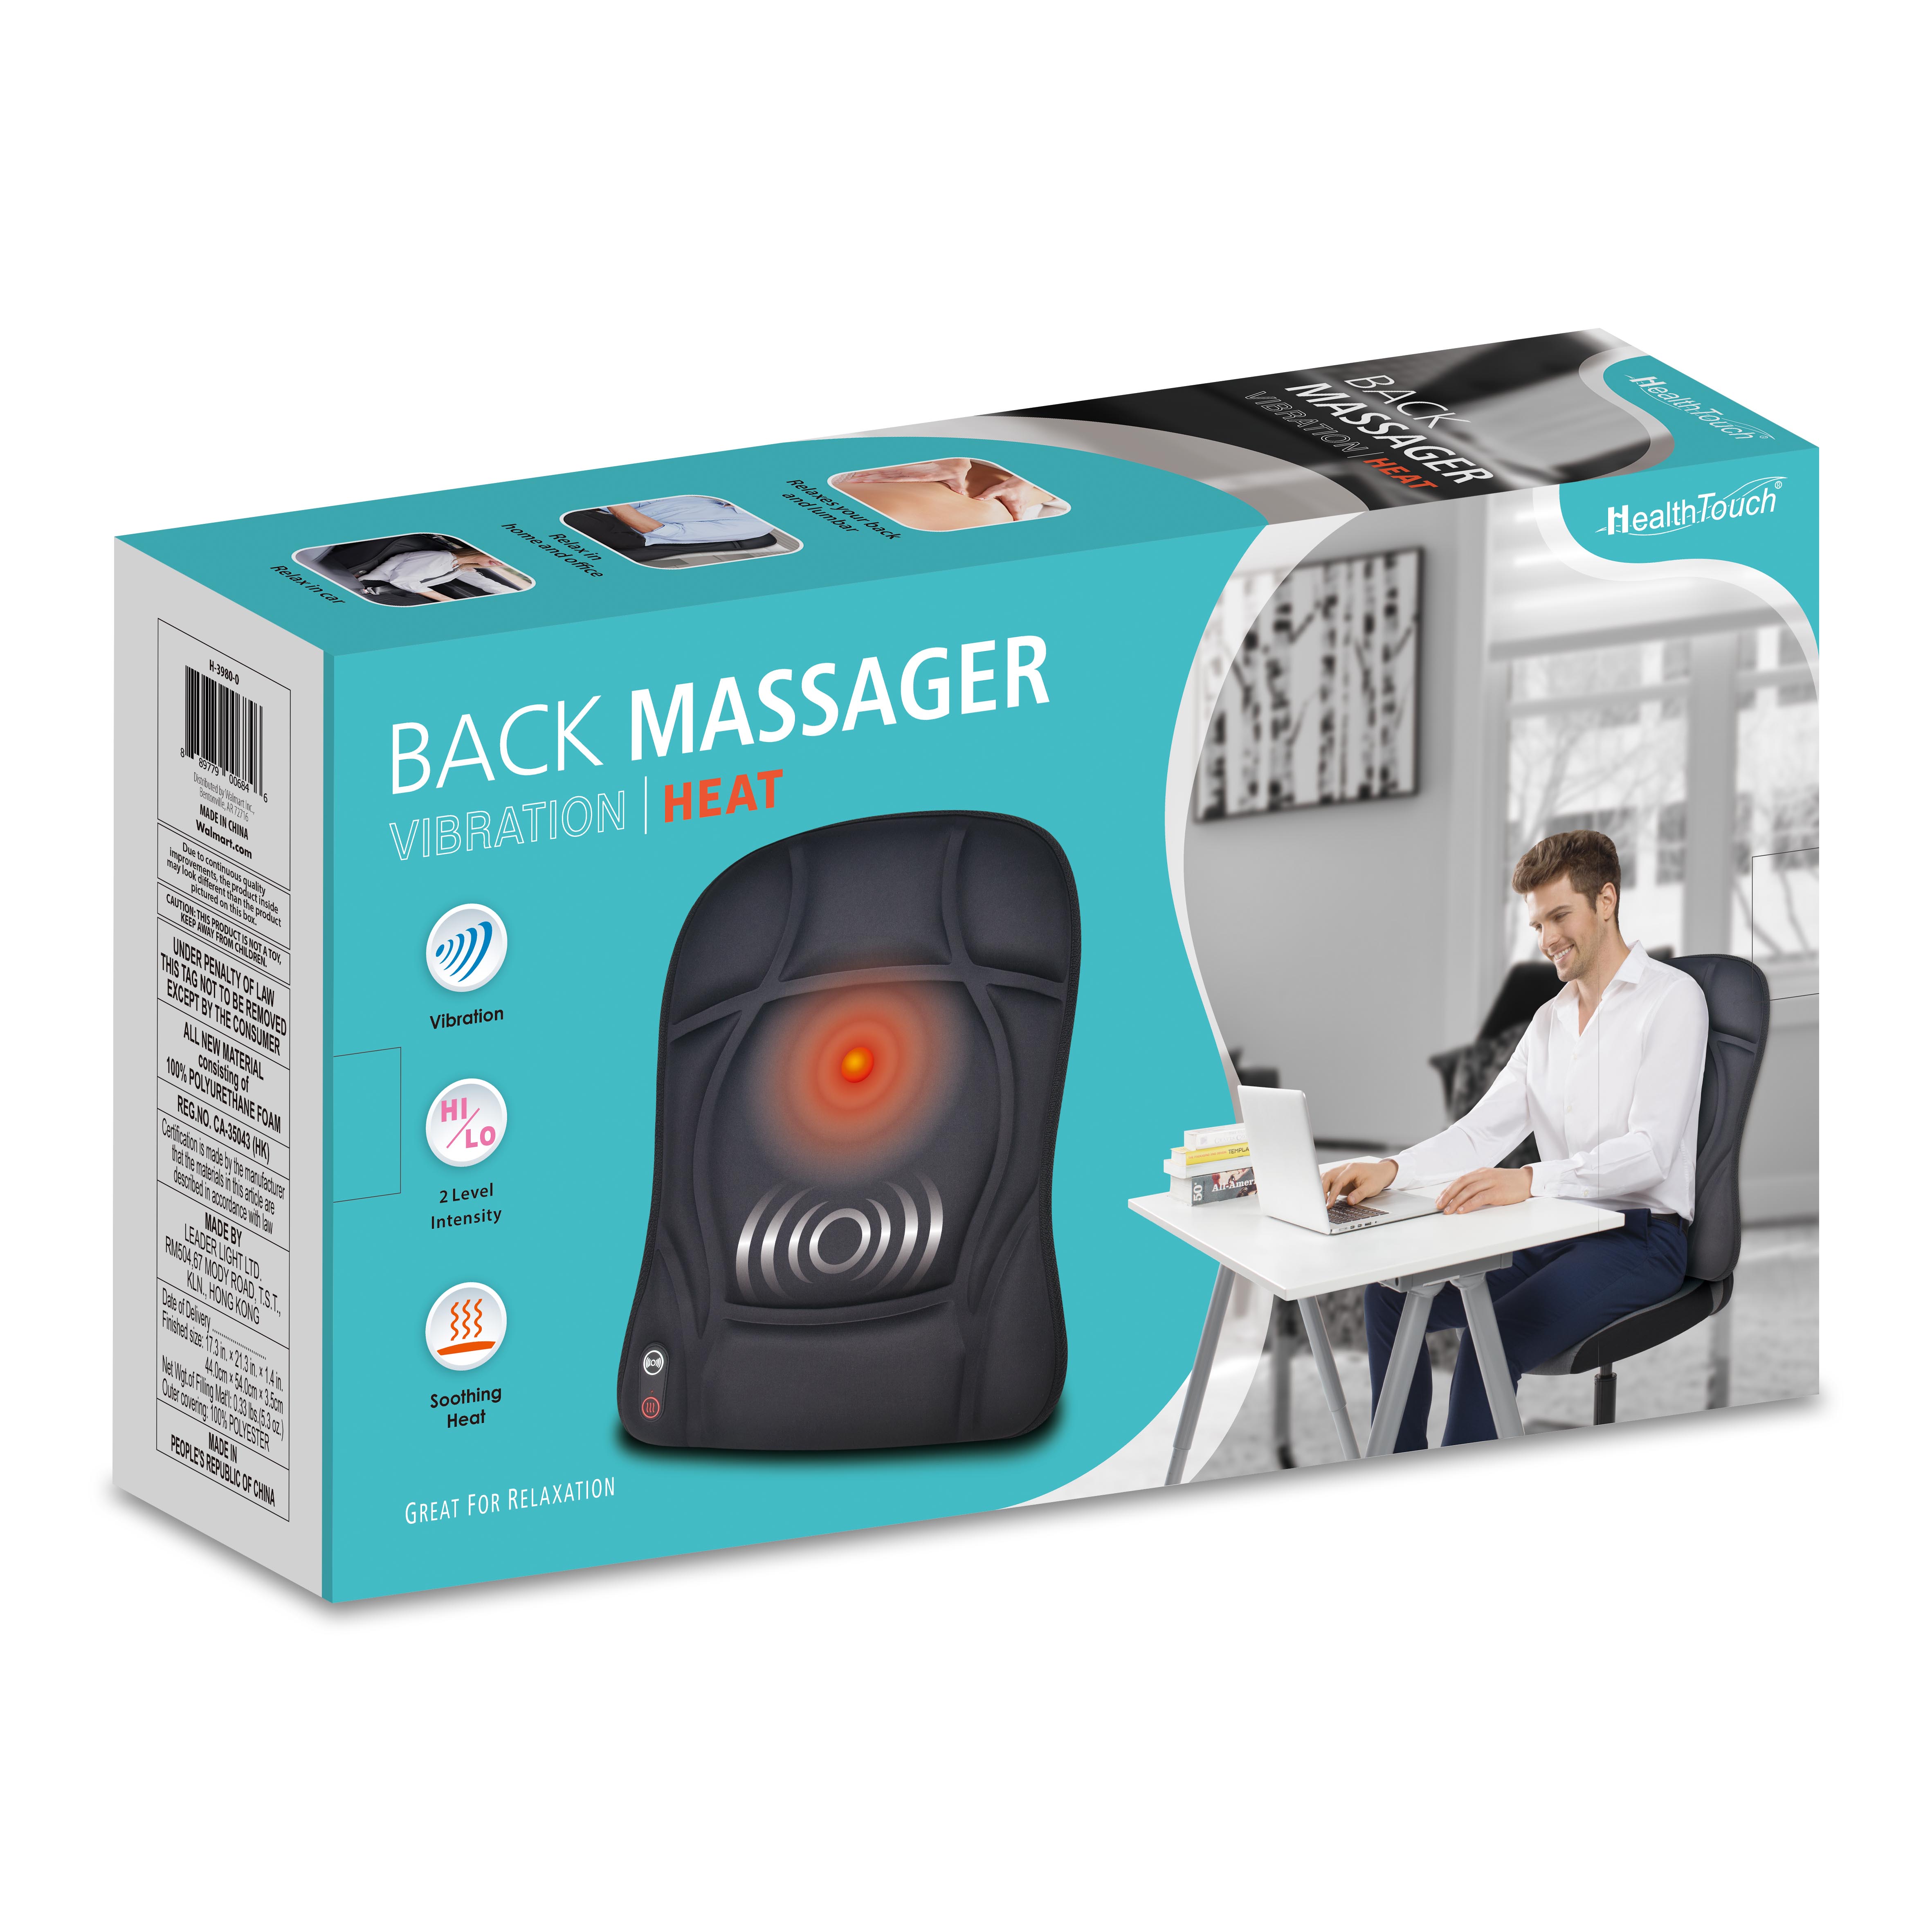 Health Touch Back Massager Vibration Massage Soothing Heat Back Relaxation 1 Motor 7339